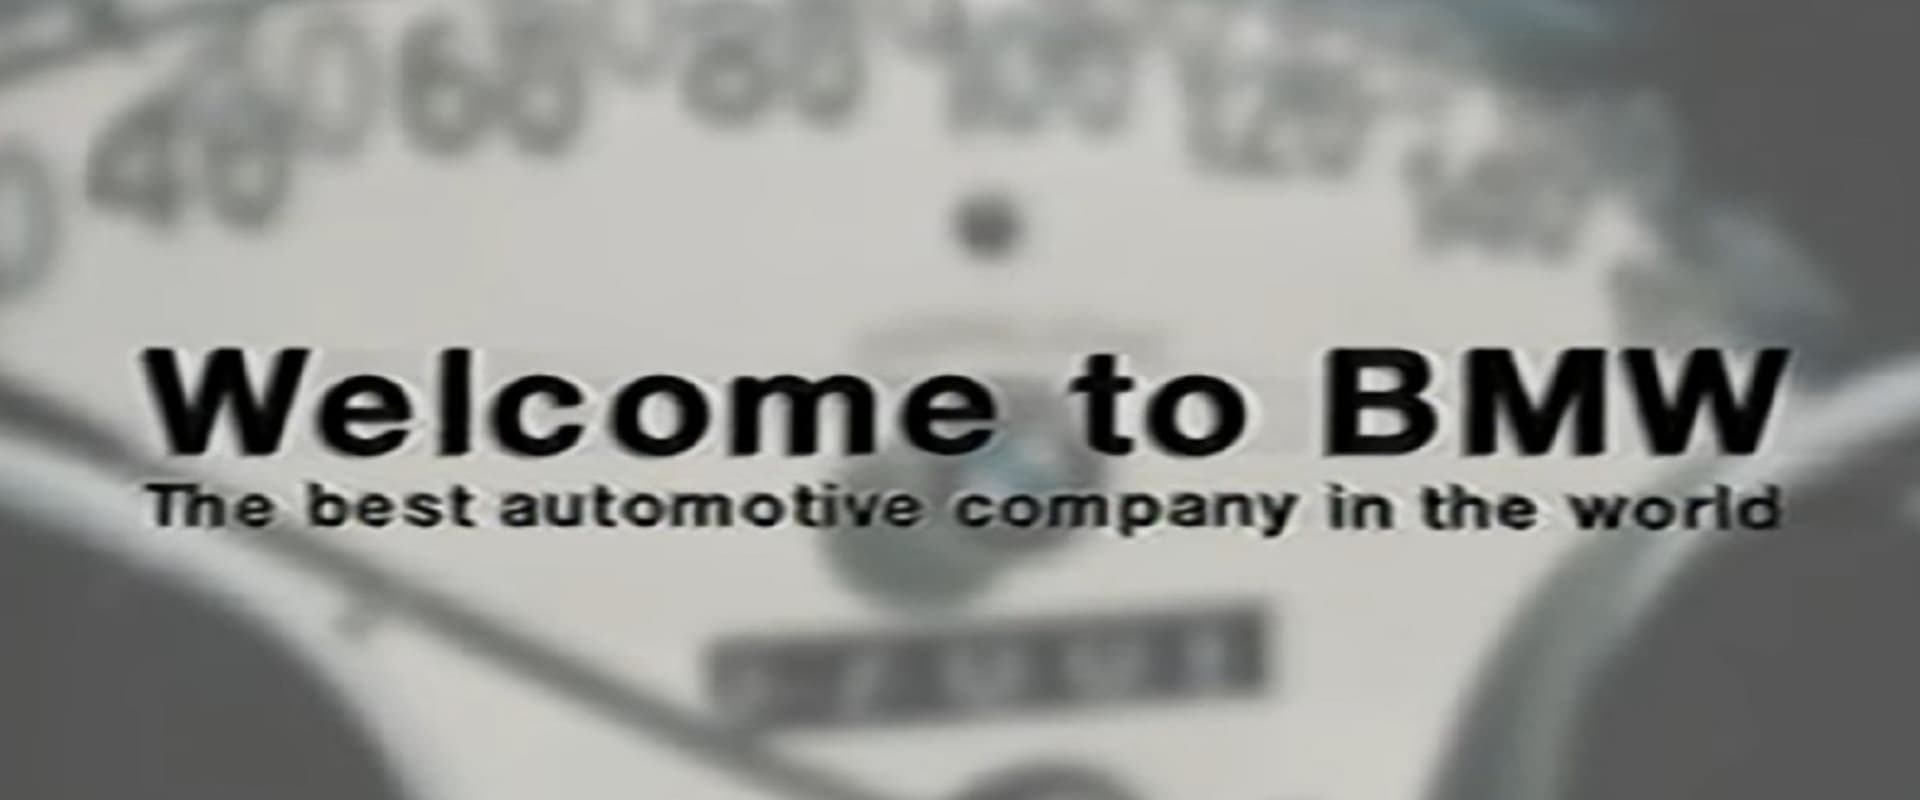 Welcome to BMW: The Greatest Automotive Company in the World